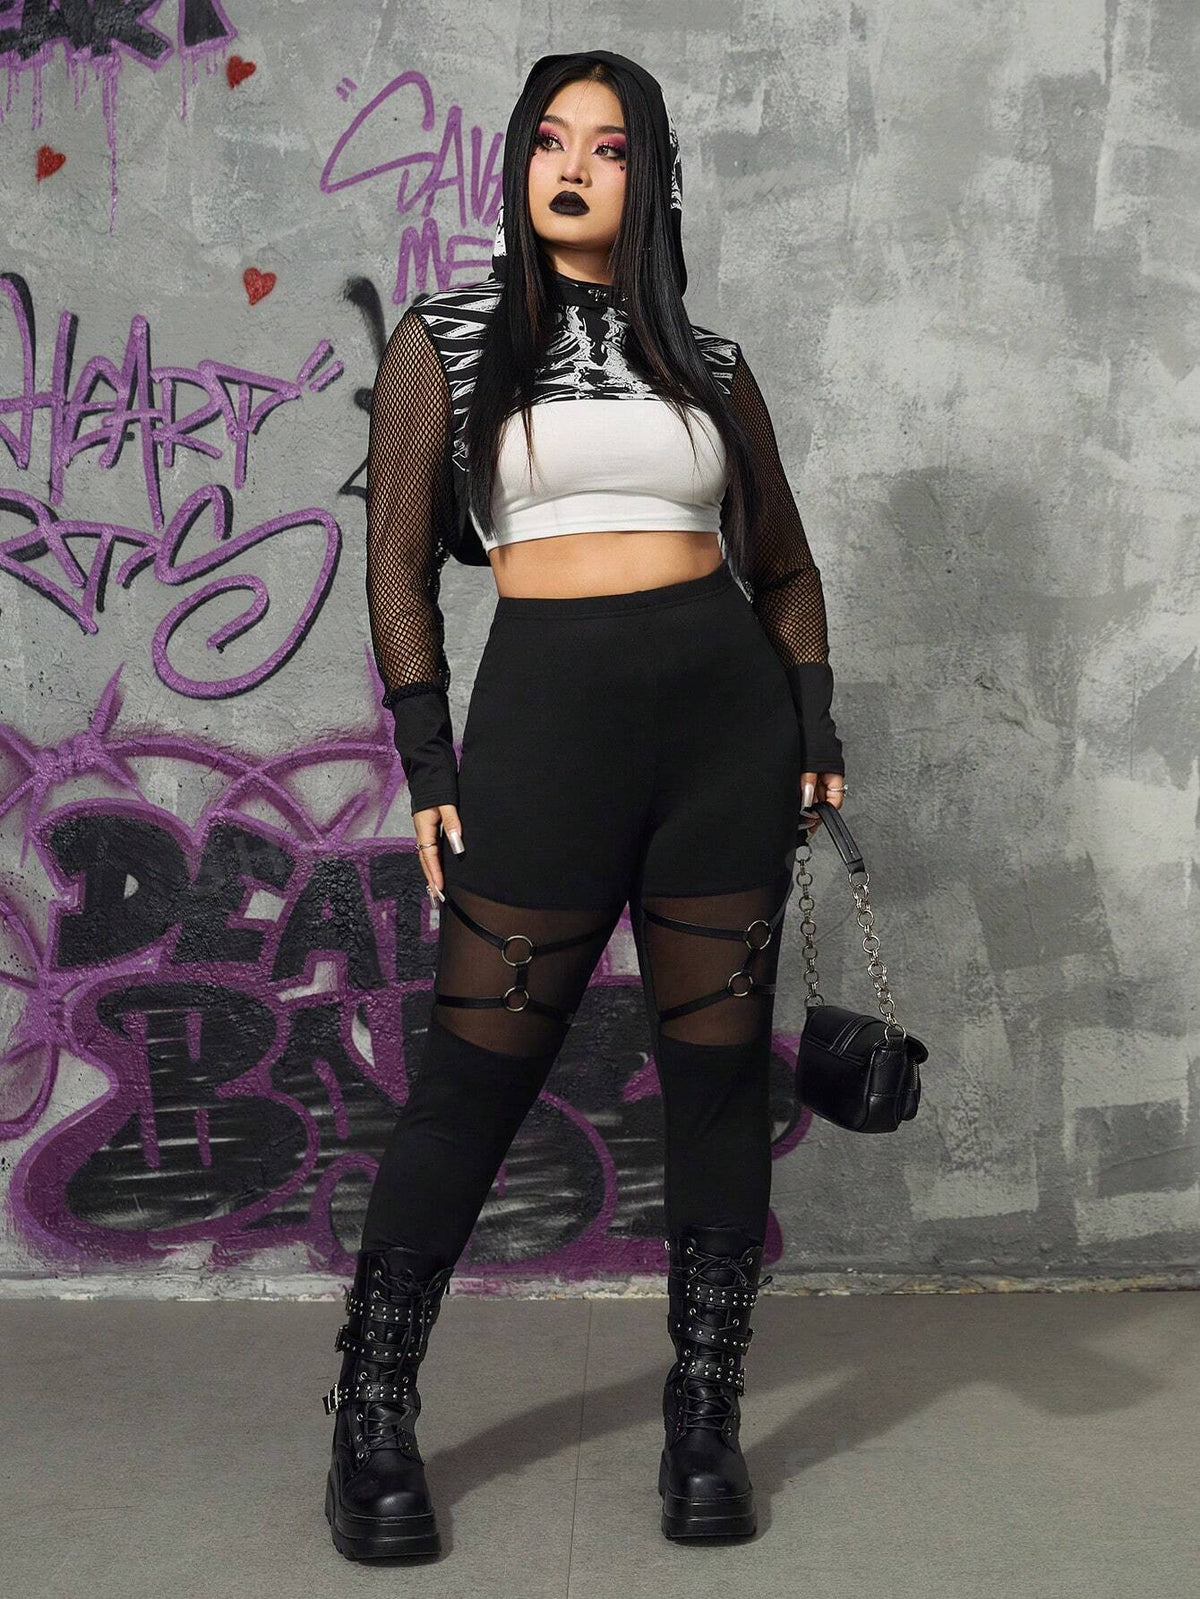 ROMWE Grunge Punk Sexy Plus Size Leggings With Hollow Out Belt Decorated Buckle Design, Gothic Punk Style